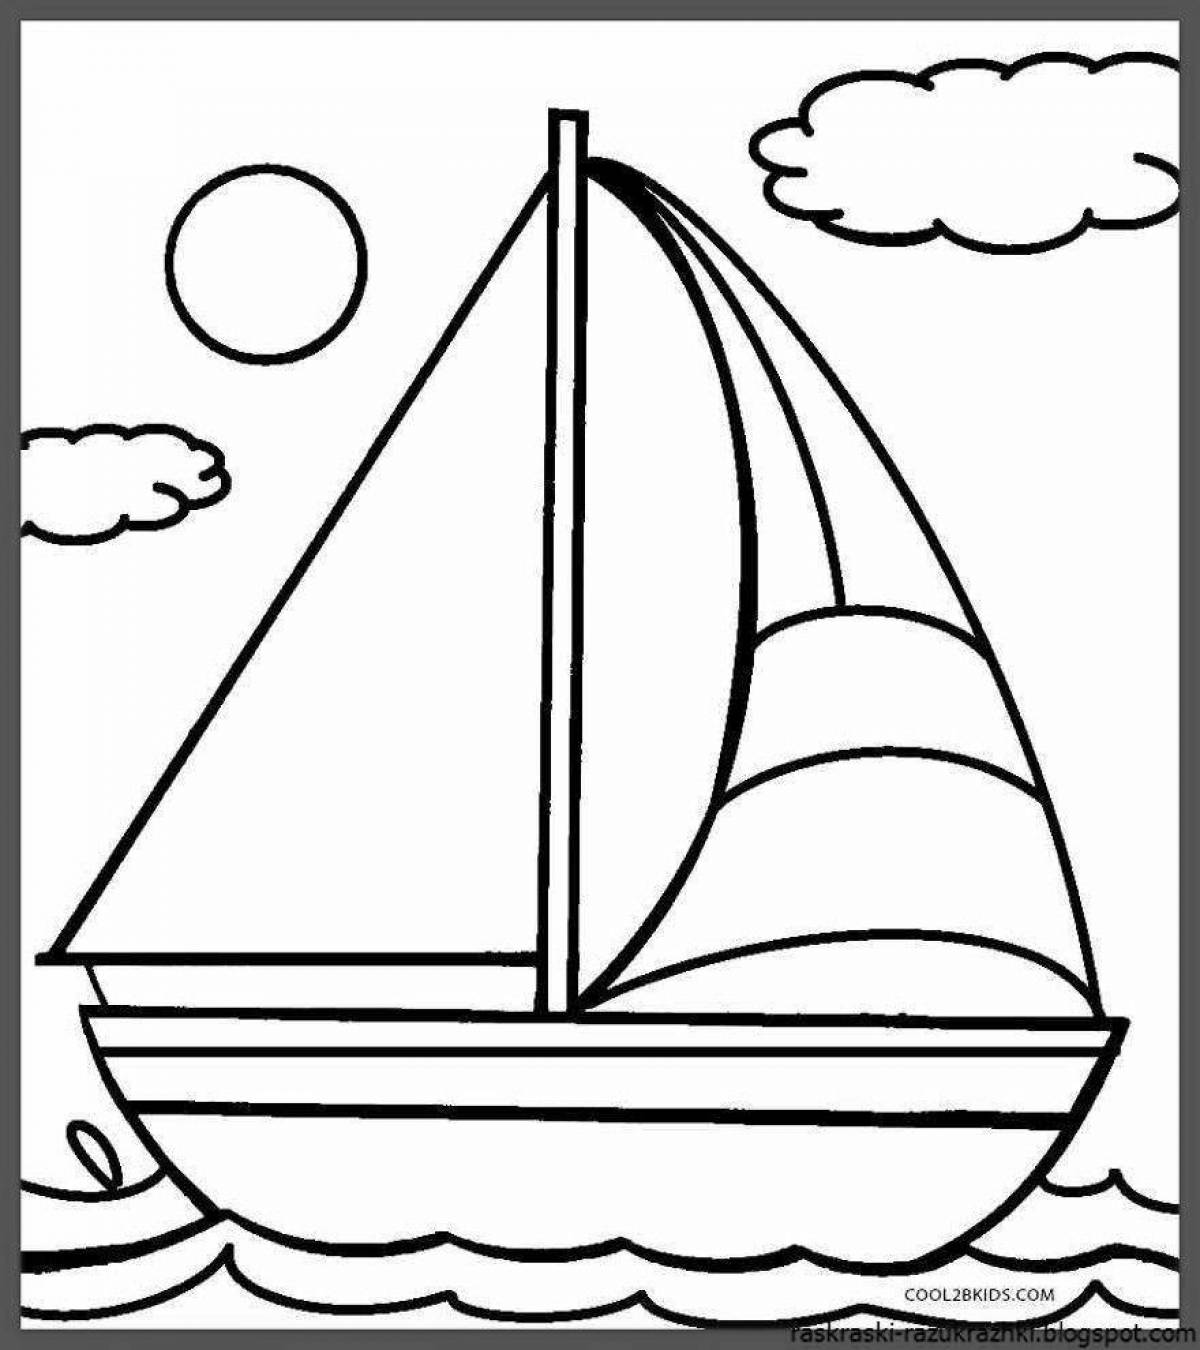 Sweet boat coloring page for kids